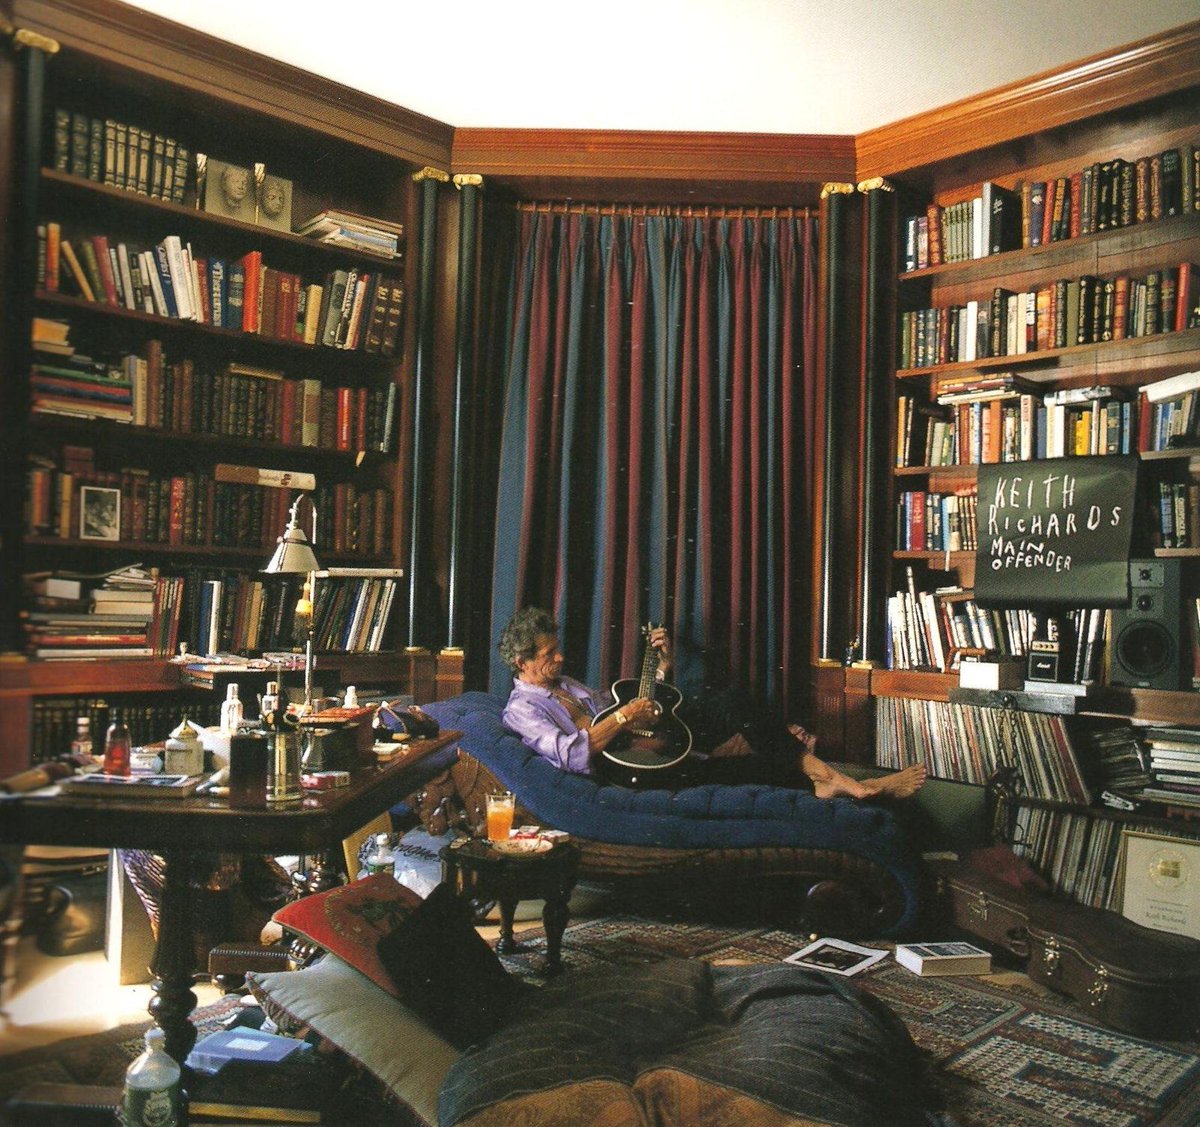 Keith Richard's home library has the kind of "bohemian-luxe" vibe you'd expect.